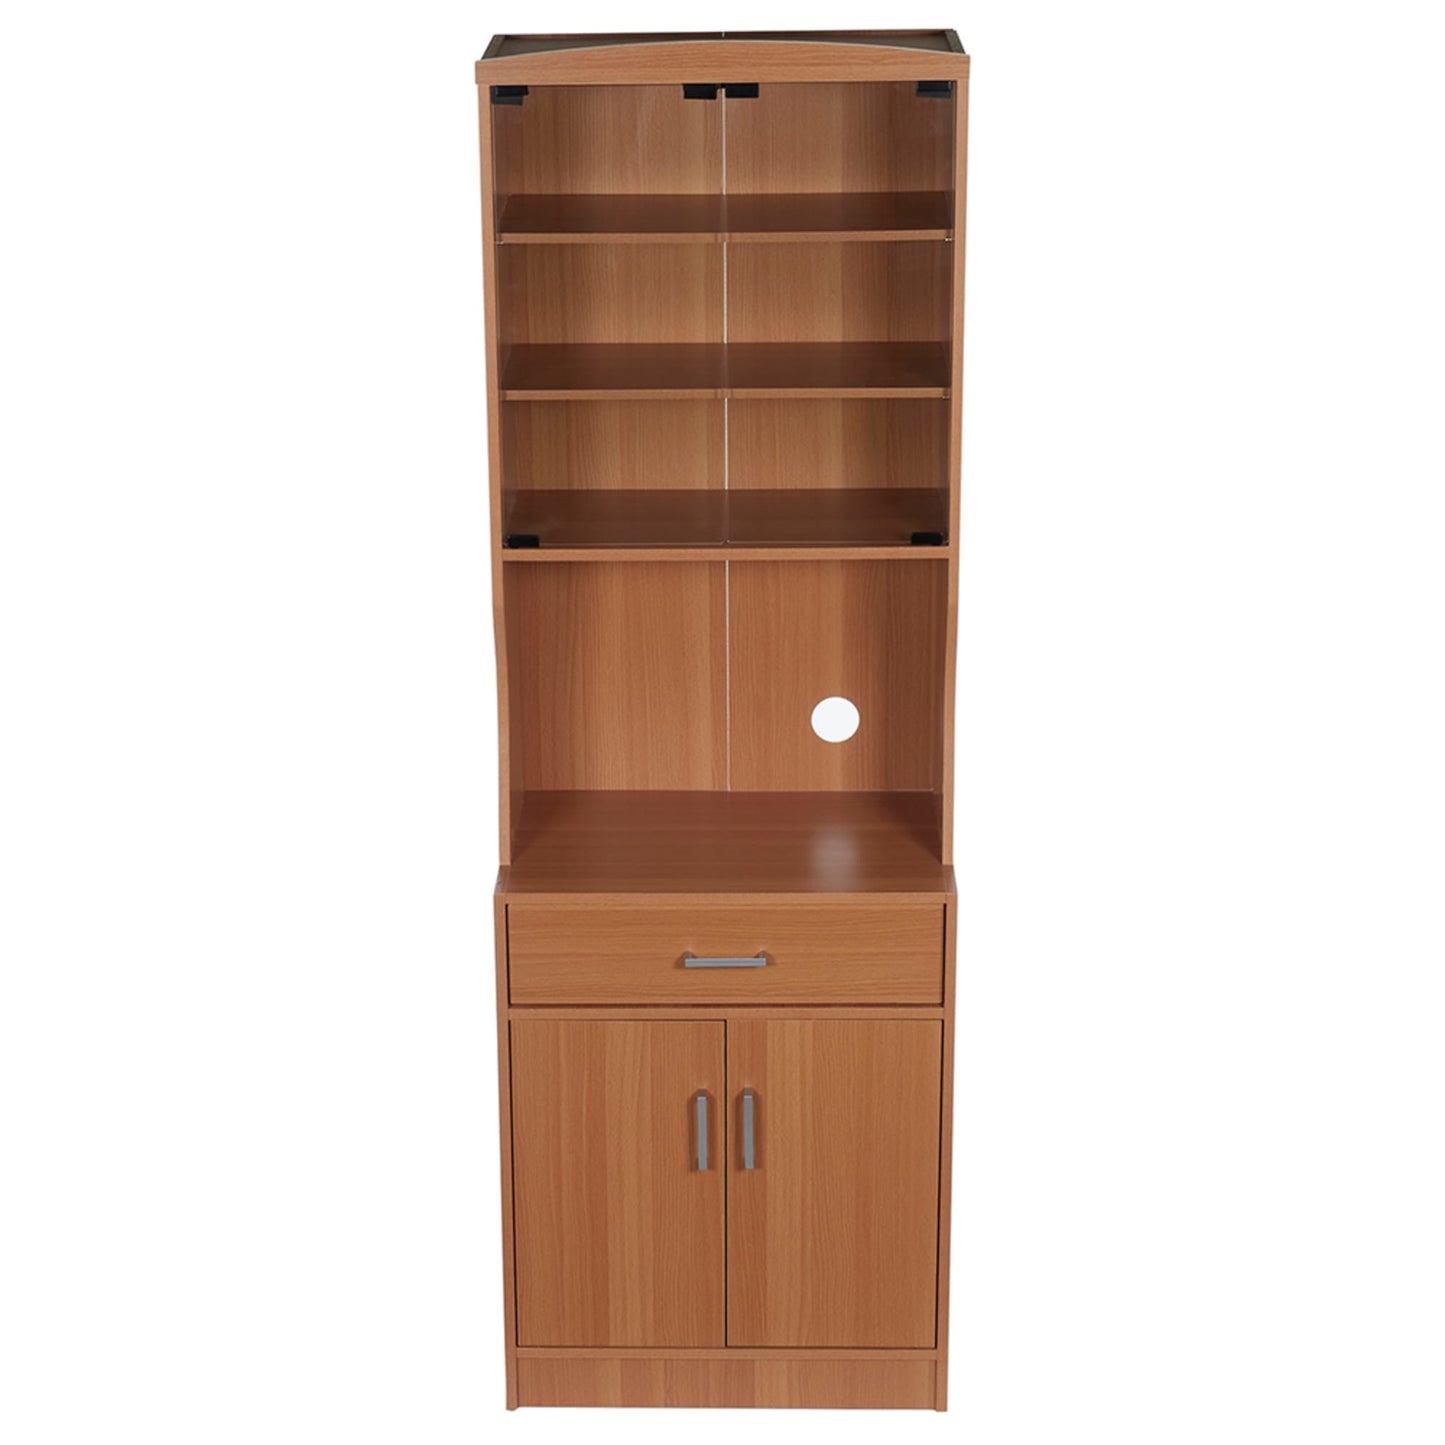 Large Wood Microwave Cabinet, Natural